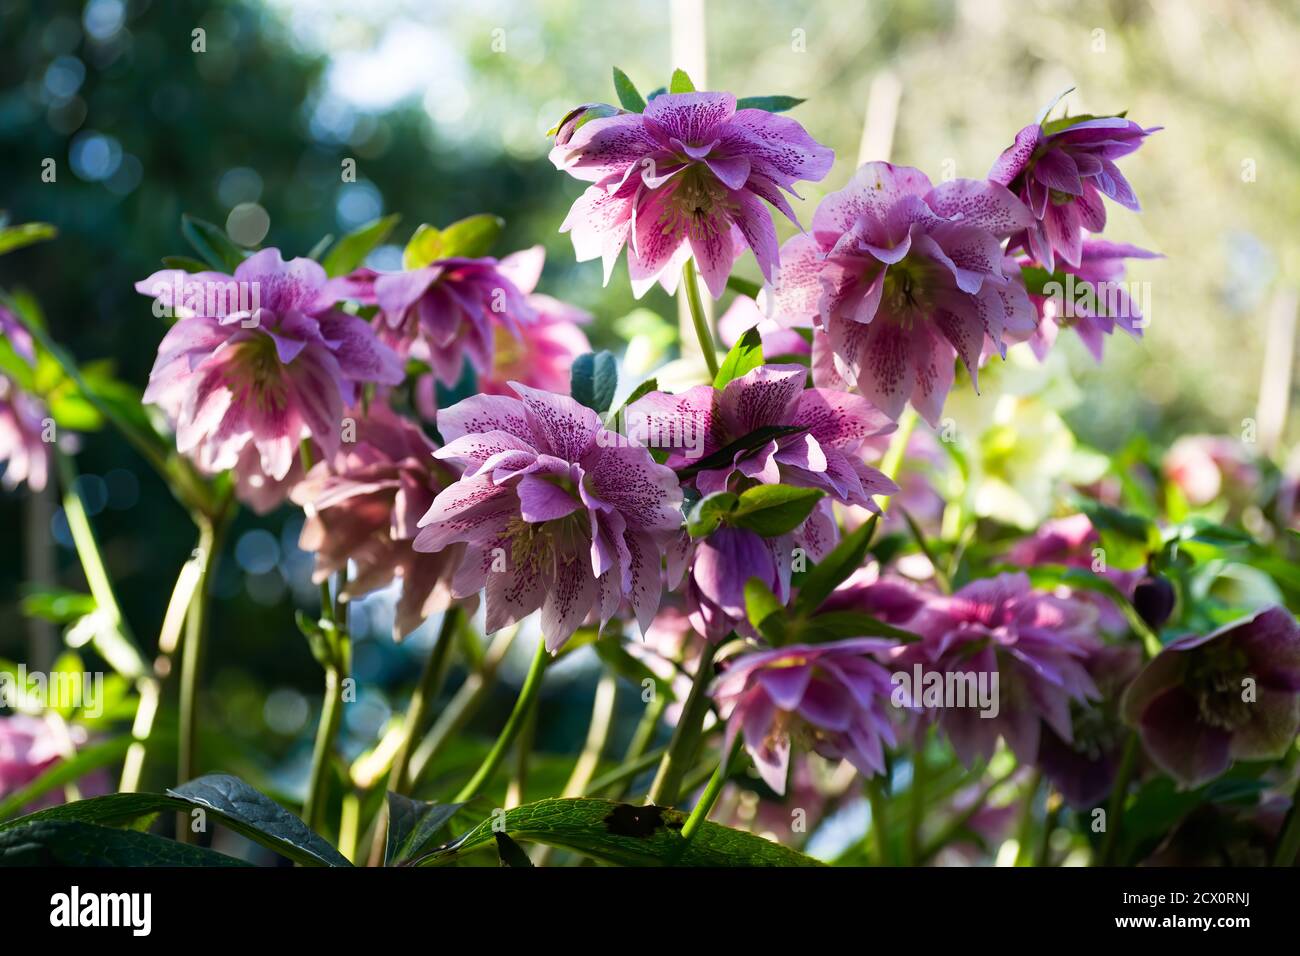 Hybrid hellebore (HELLEBORUS HYBRIDUS) double pink with dots of fuchsia color, green and blurry background. Stock Photo